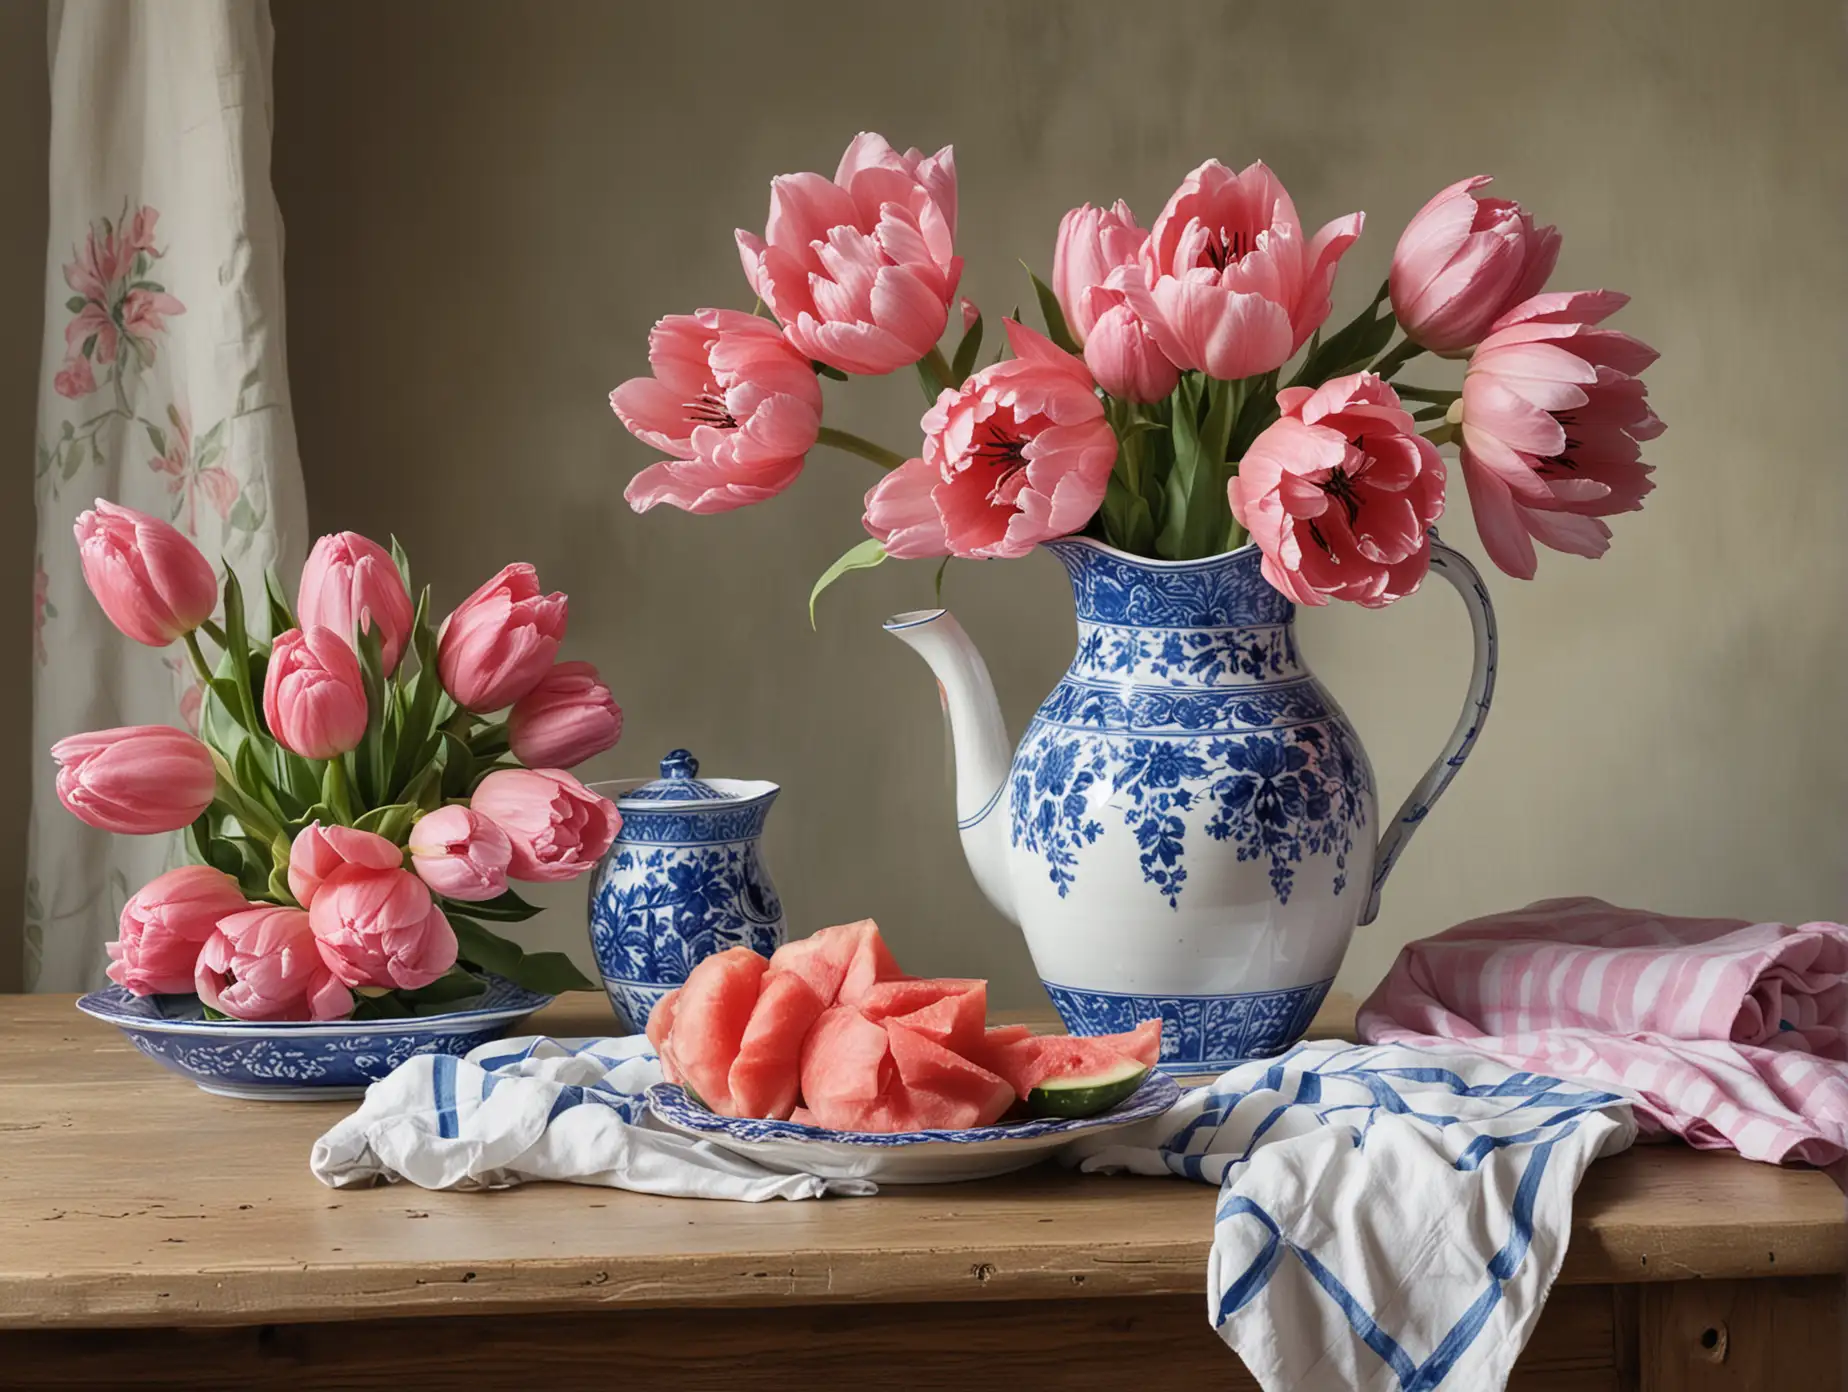 A STILL LIFE PAINTING, WITH AONE BLUE AND WHITE CHINA PITCHER ON A TABLE, WITH A CLOTH AND A SLICE OF  WATERMELLON ON A PLATE, WITH PINK TULIPS IN THE VASE